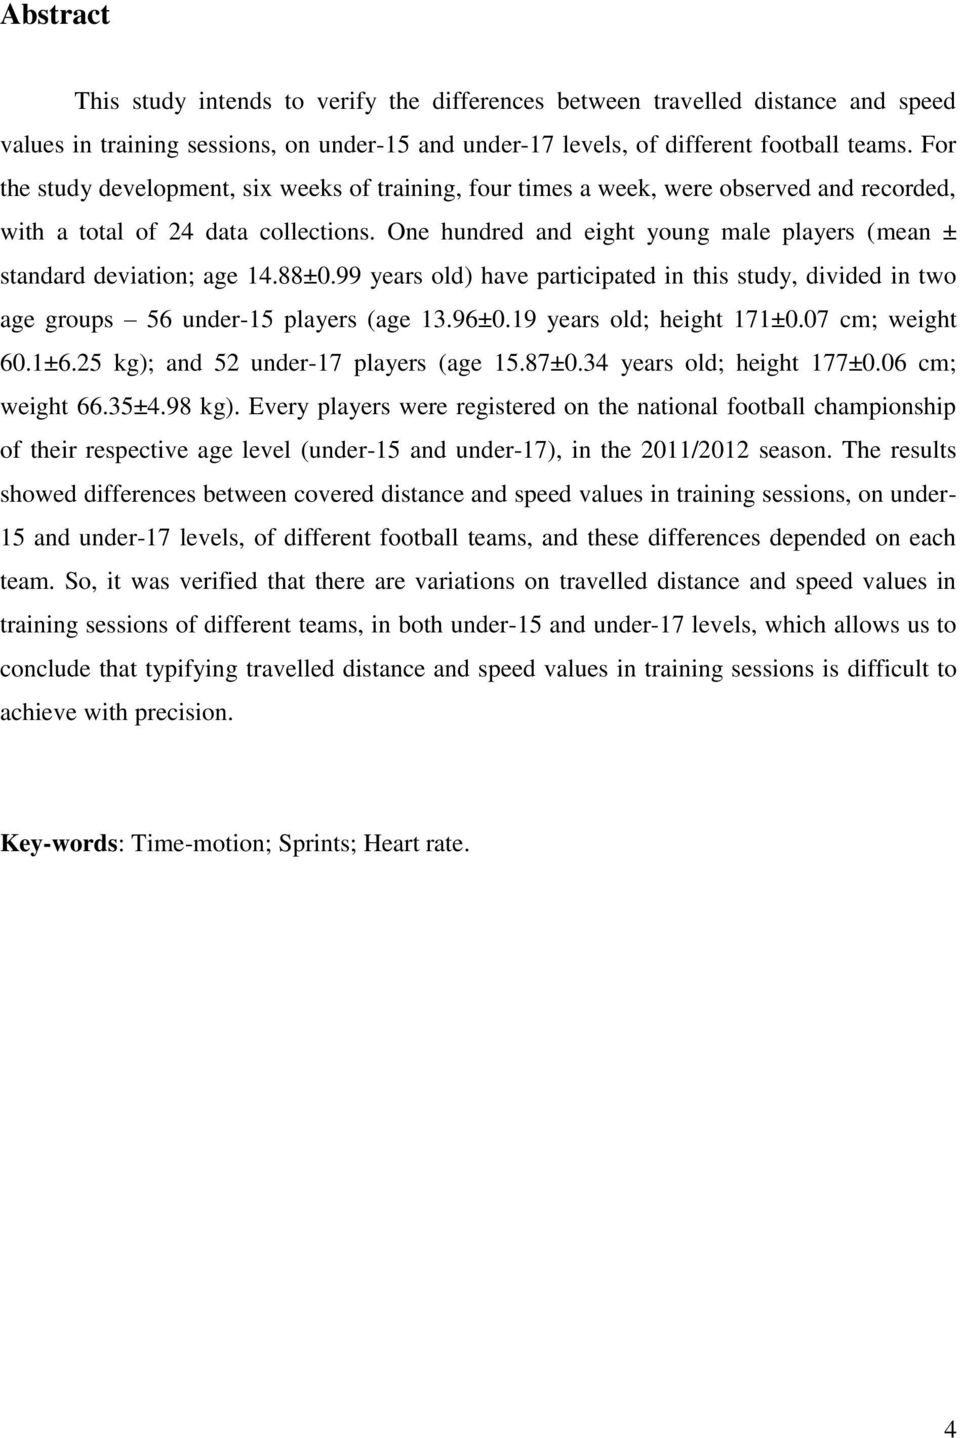 One hundred and eight young male players (mean ± standard deviation; age 14.88±0.99 years old) have participated in this study, divided in two age groups 56 under-15 players (age 13.96±0.